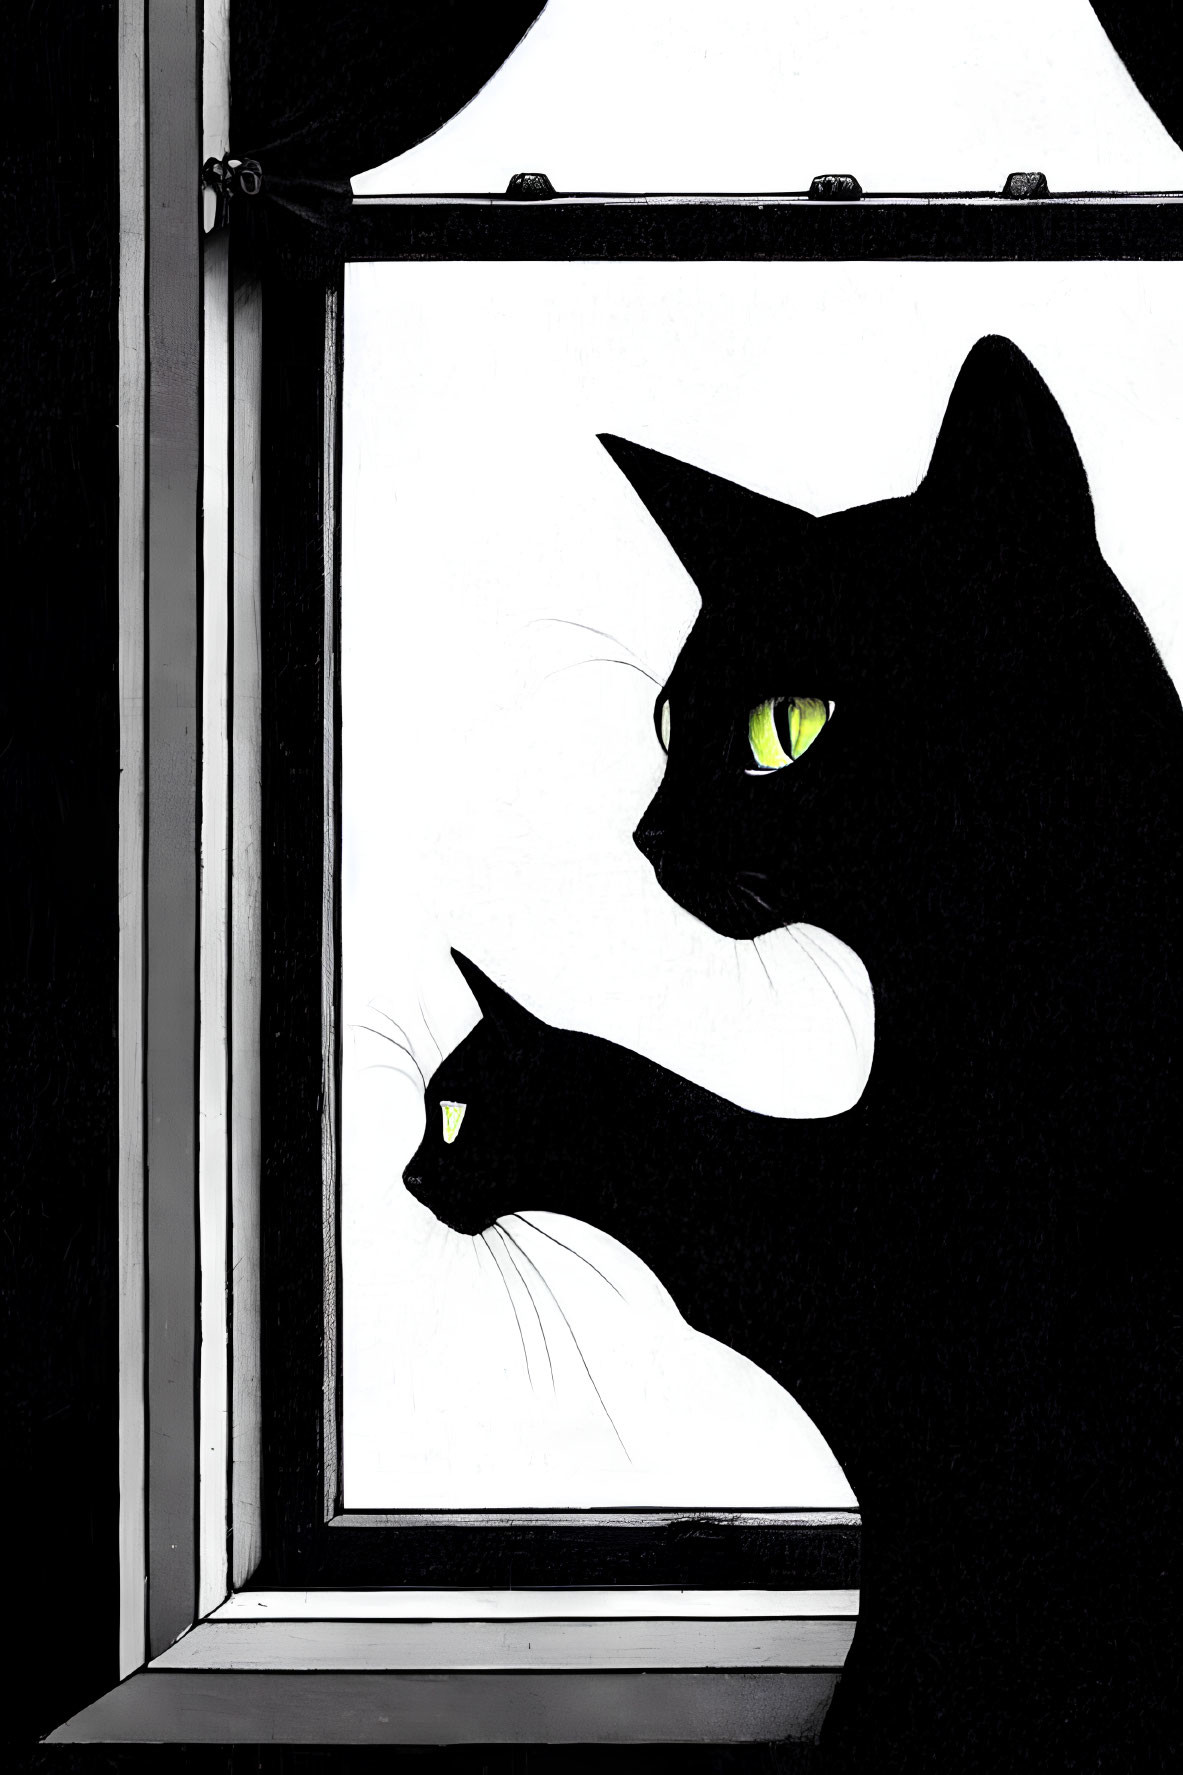 Stylized black cat with yellow eyes by open window and reflection